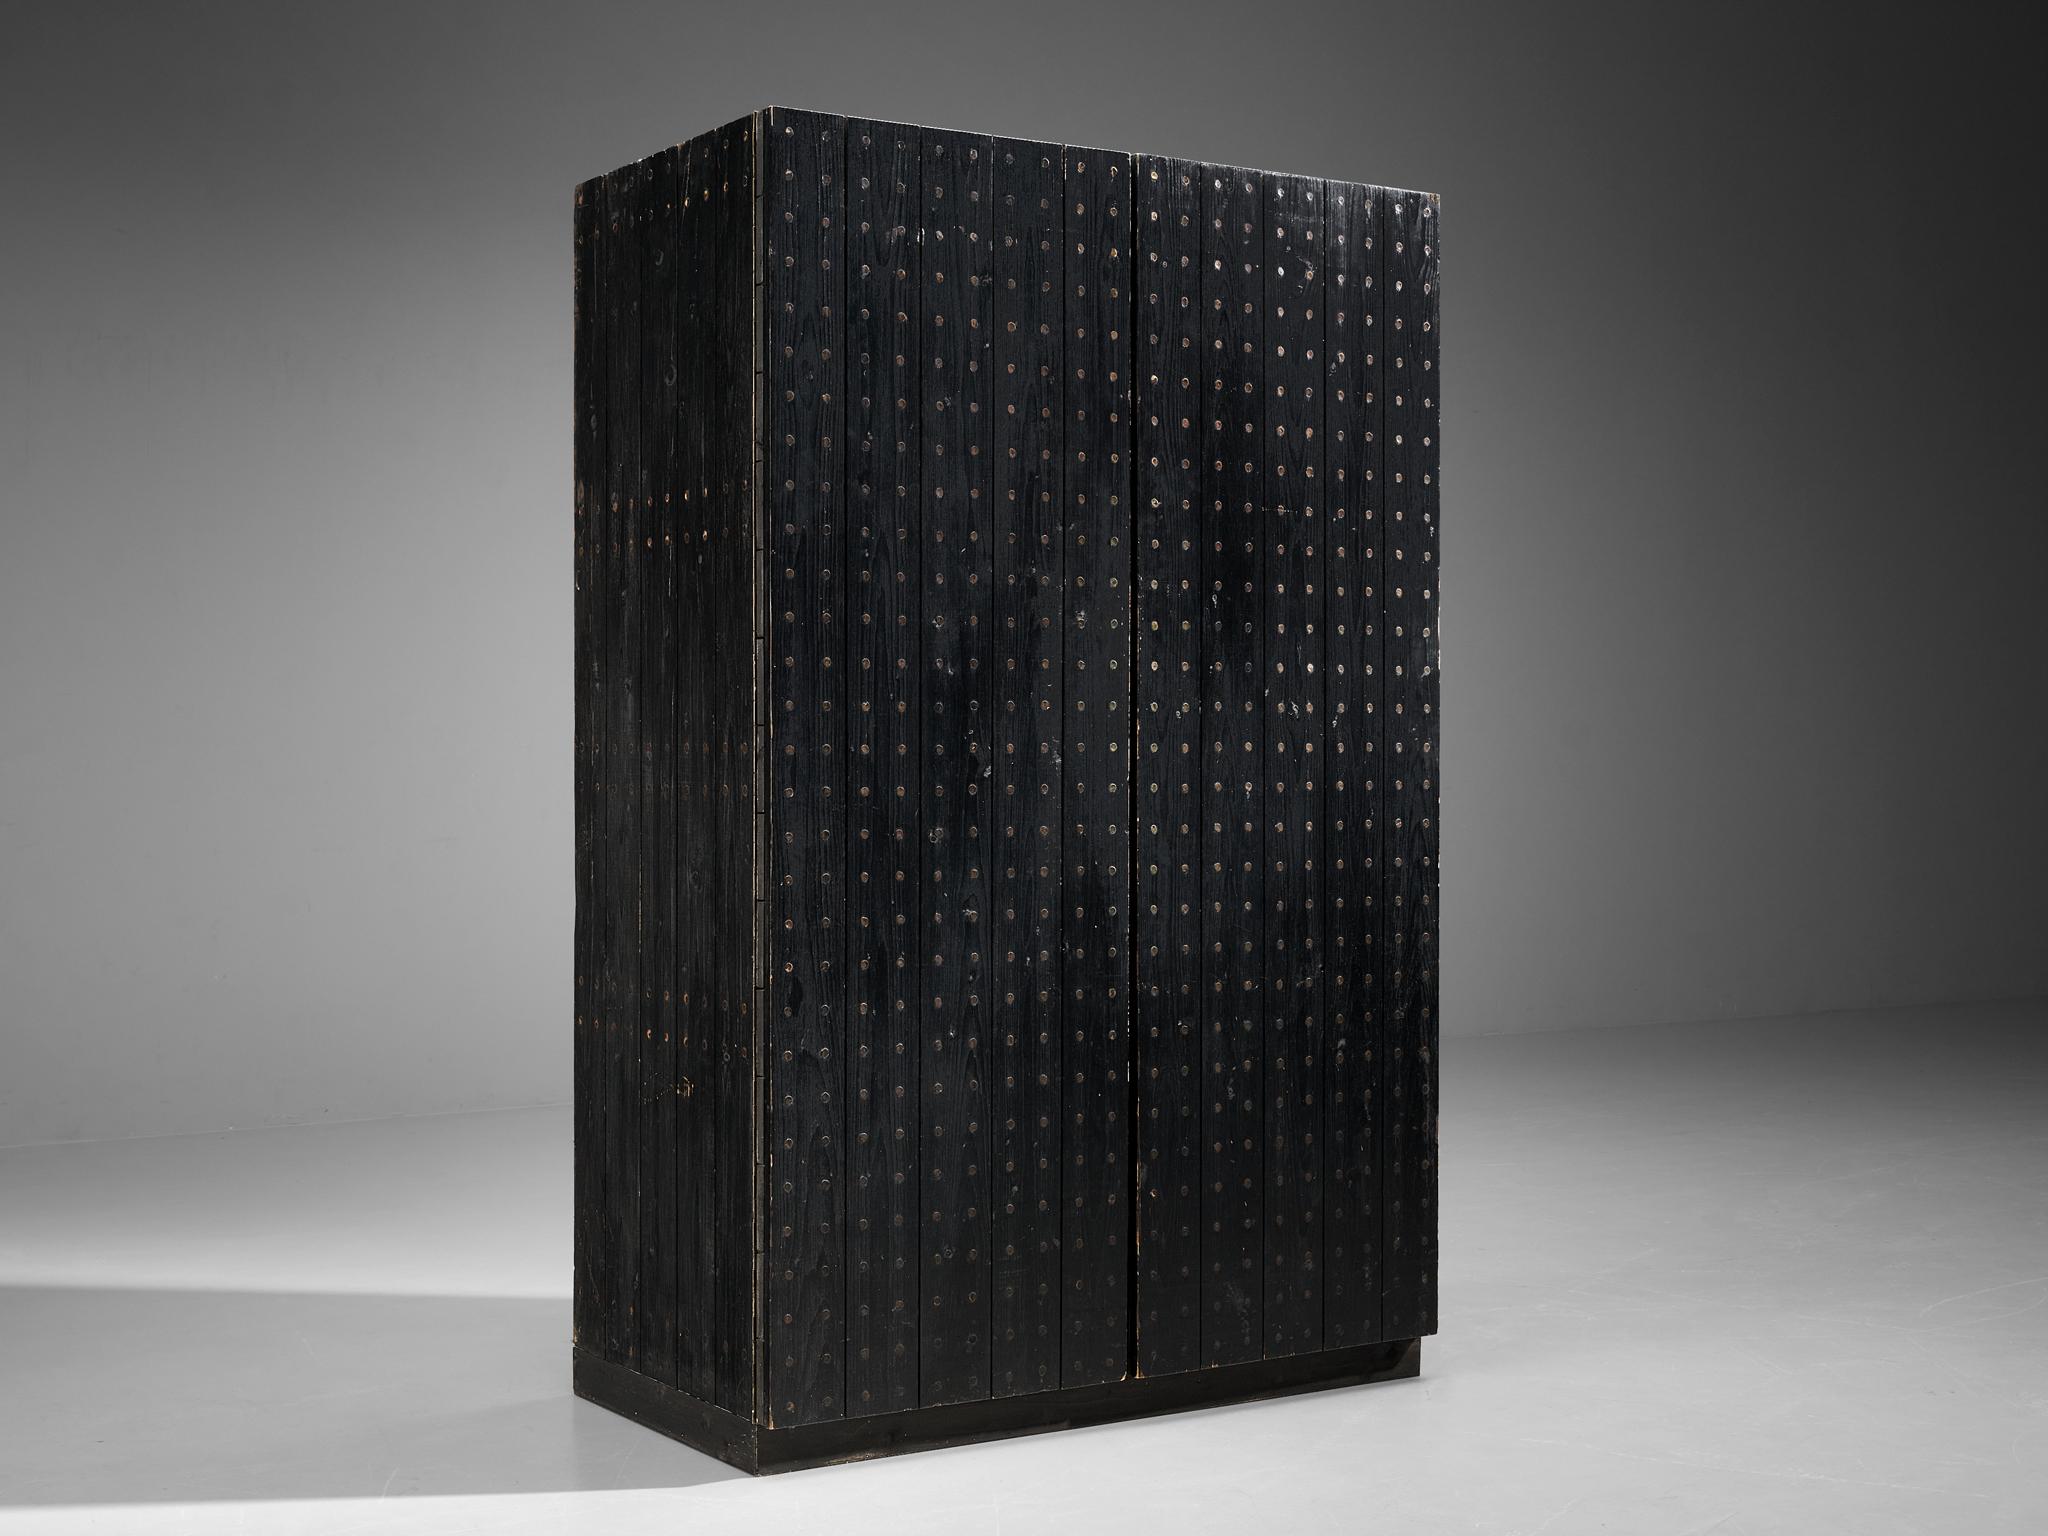 Dutch cabinet, pine, metal, The Netherlands, 1970s

This striking cabinet originates from The Netherlands. Its cubic appearance is emphasized by the dark colored wood. Vertically arranged slats in pine structure the cabinet in a rhythmic way. A